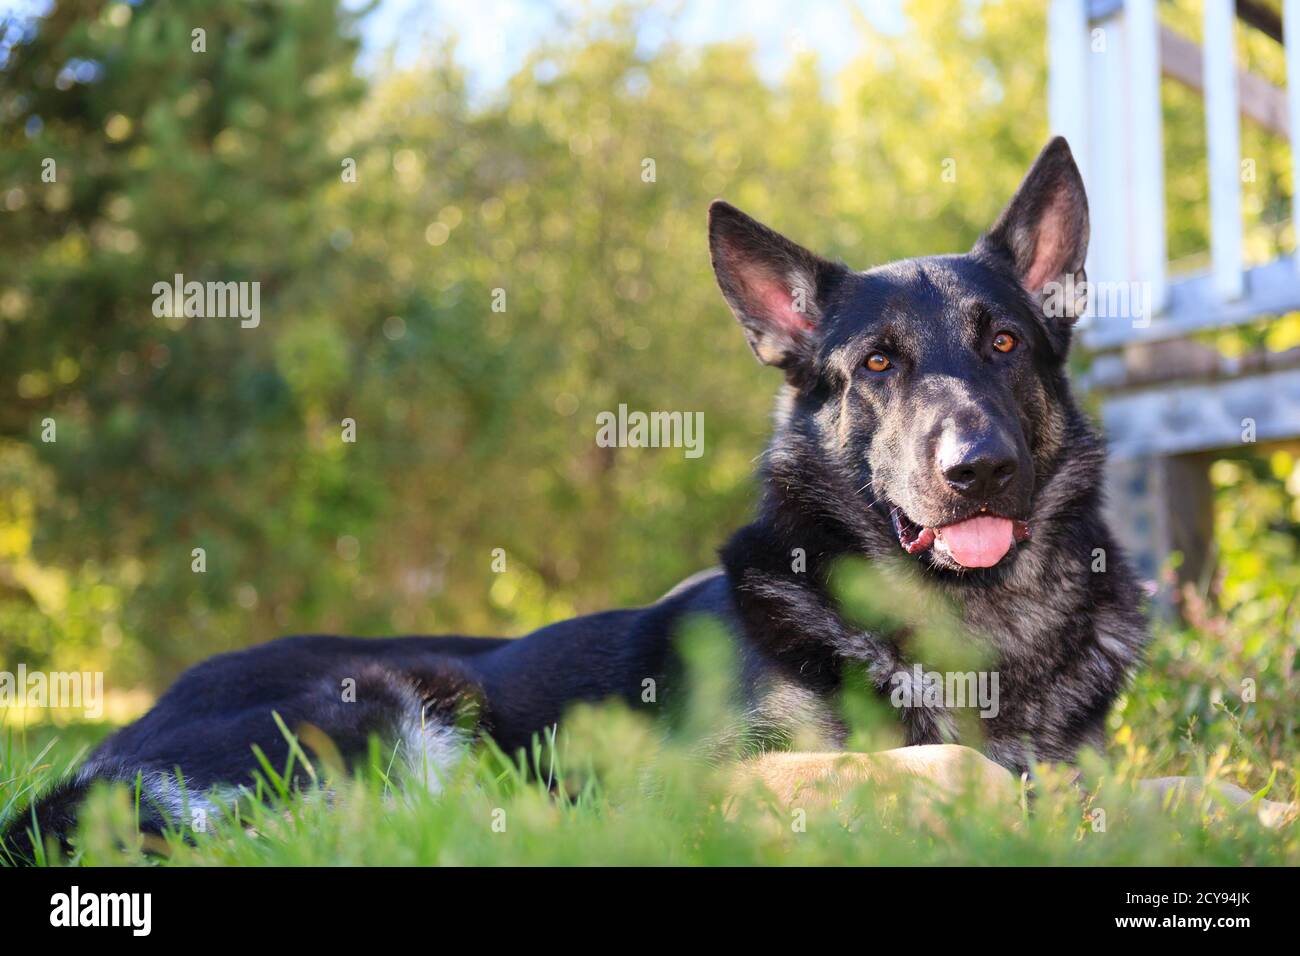 German shepherd dog lying in the grass in front of a forest Stock Photo